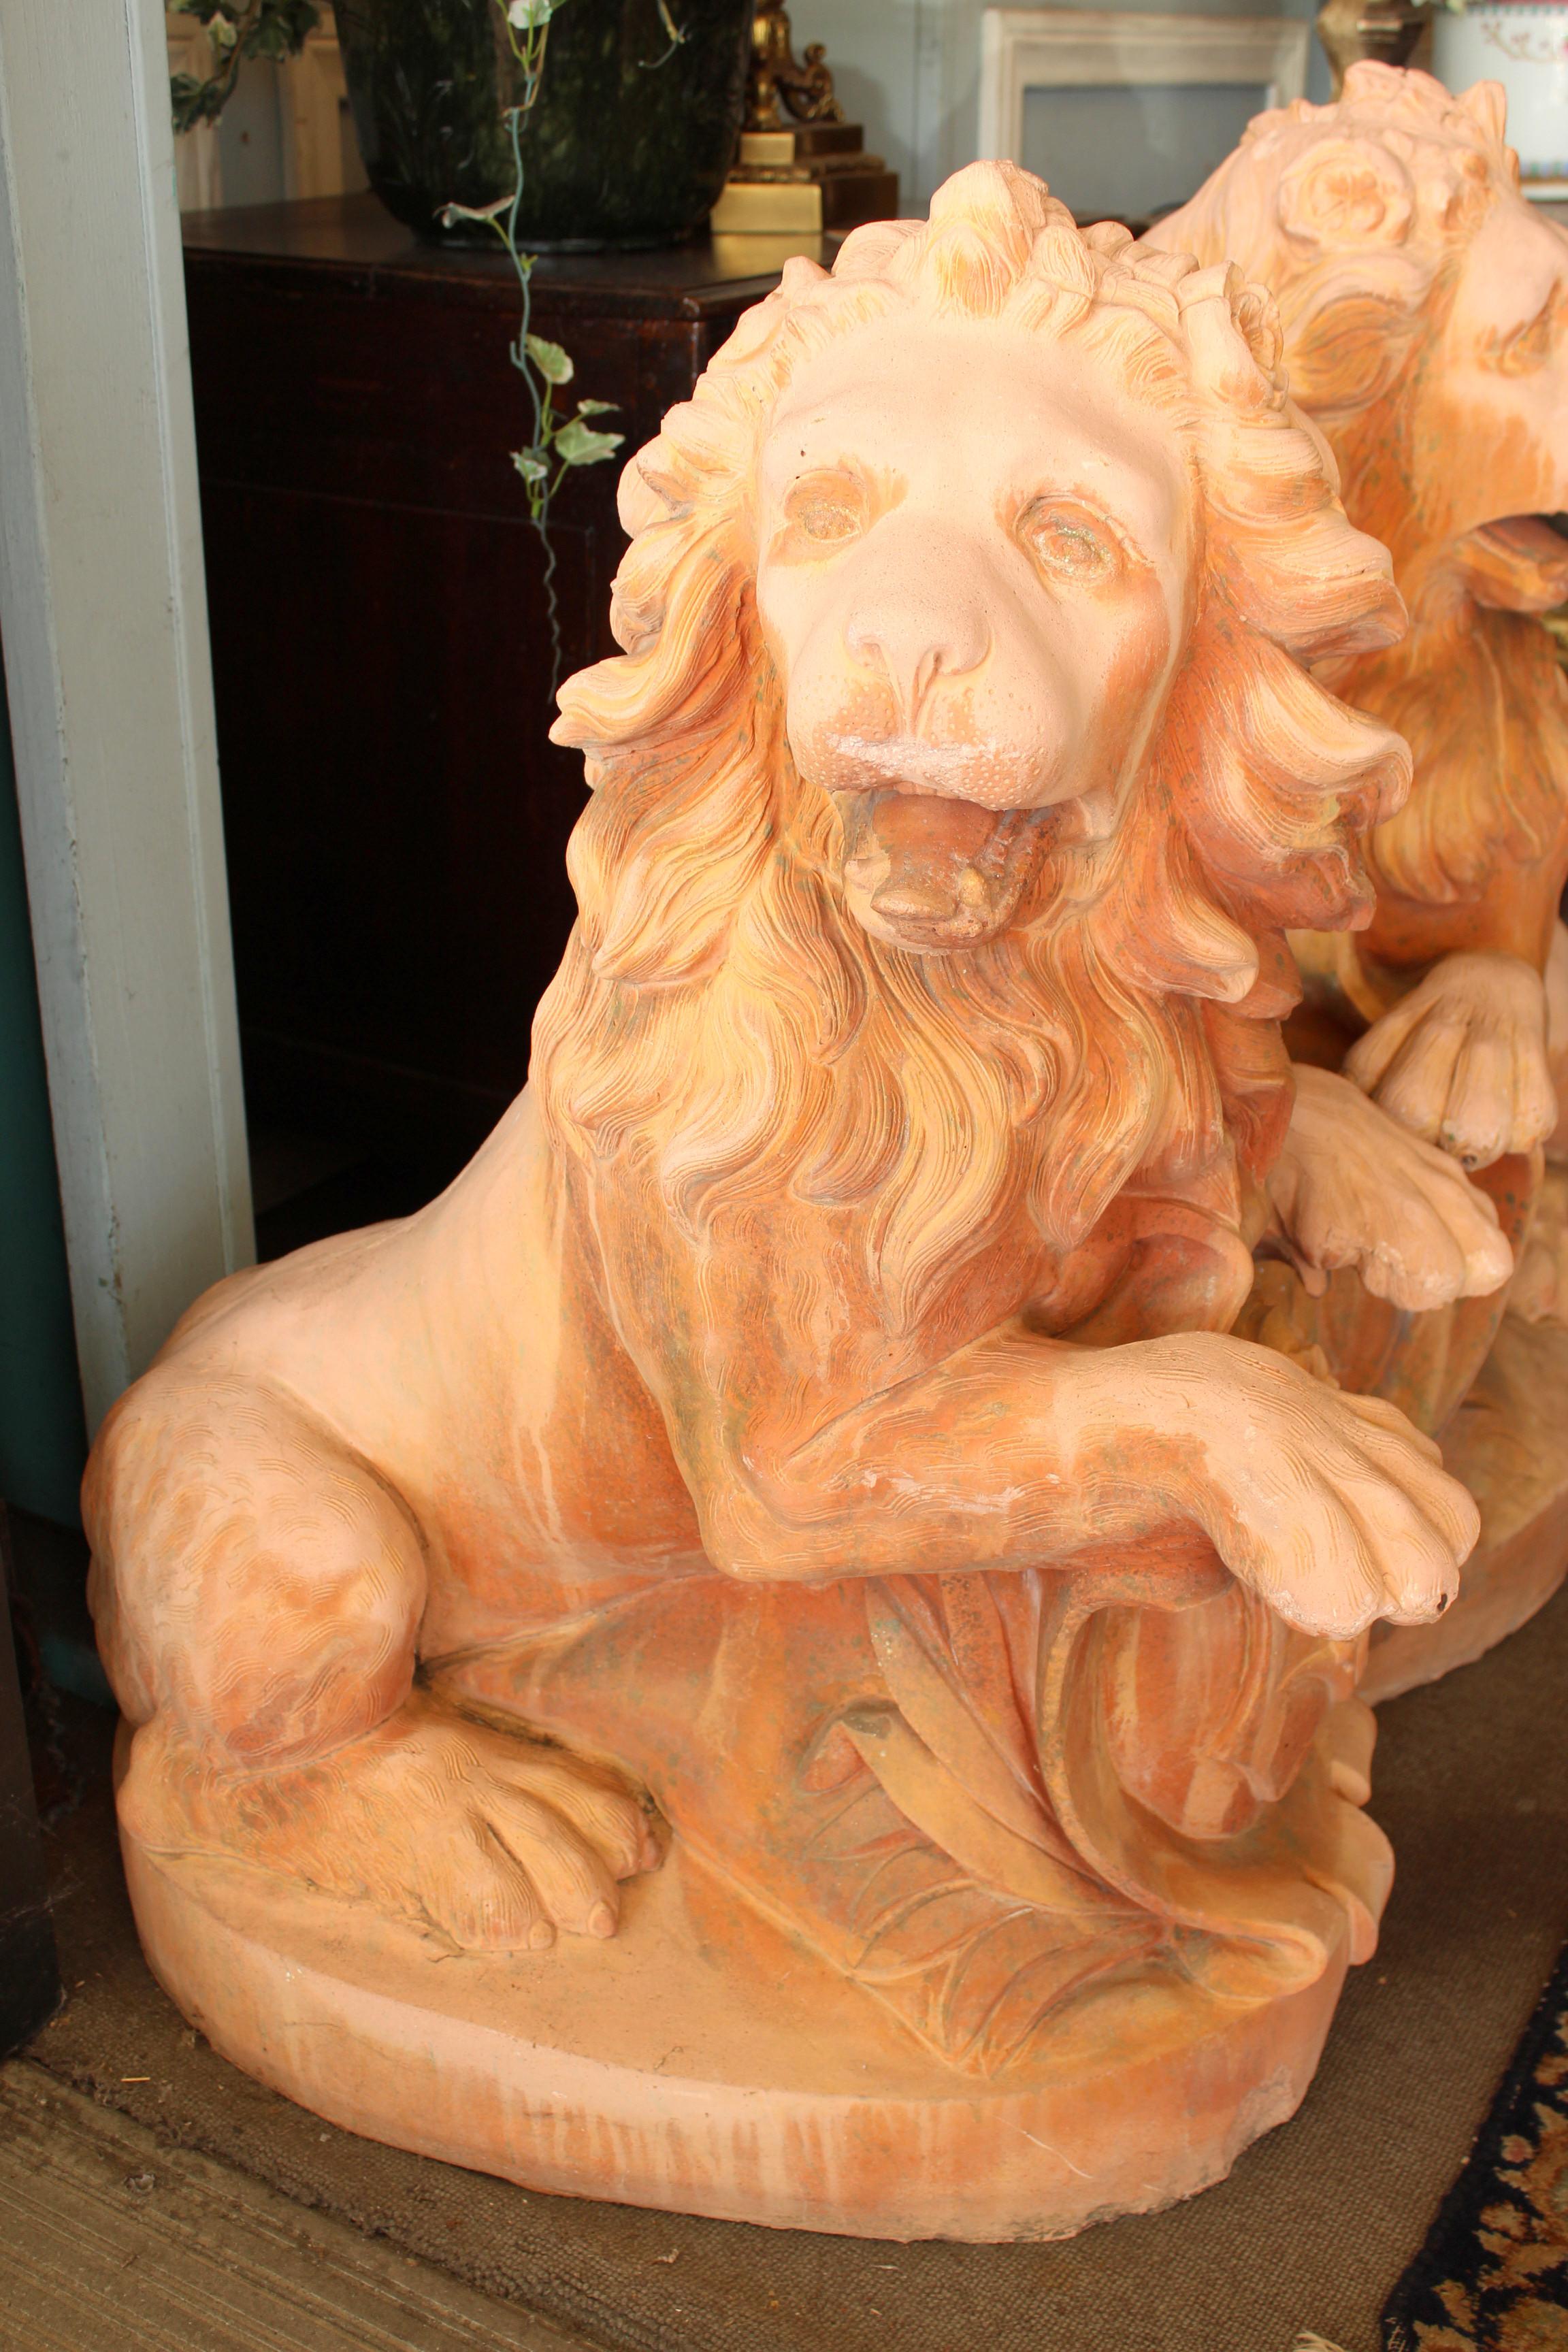 Large pair of cast stone garden lions with terracotta color, approximately 20-40 years old.